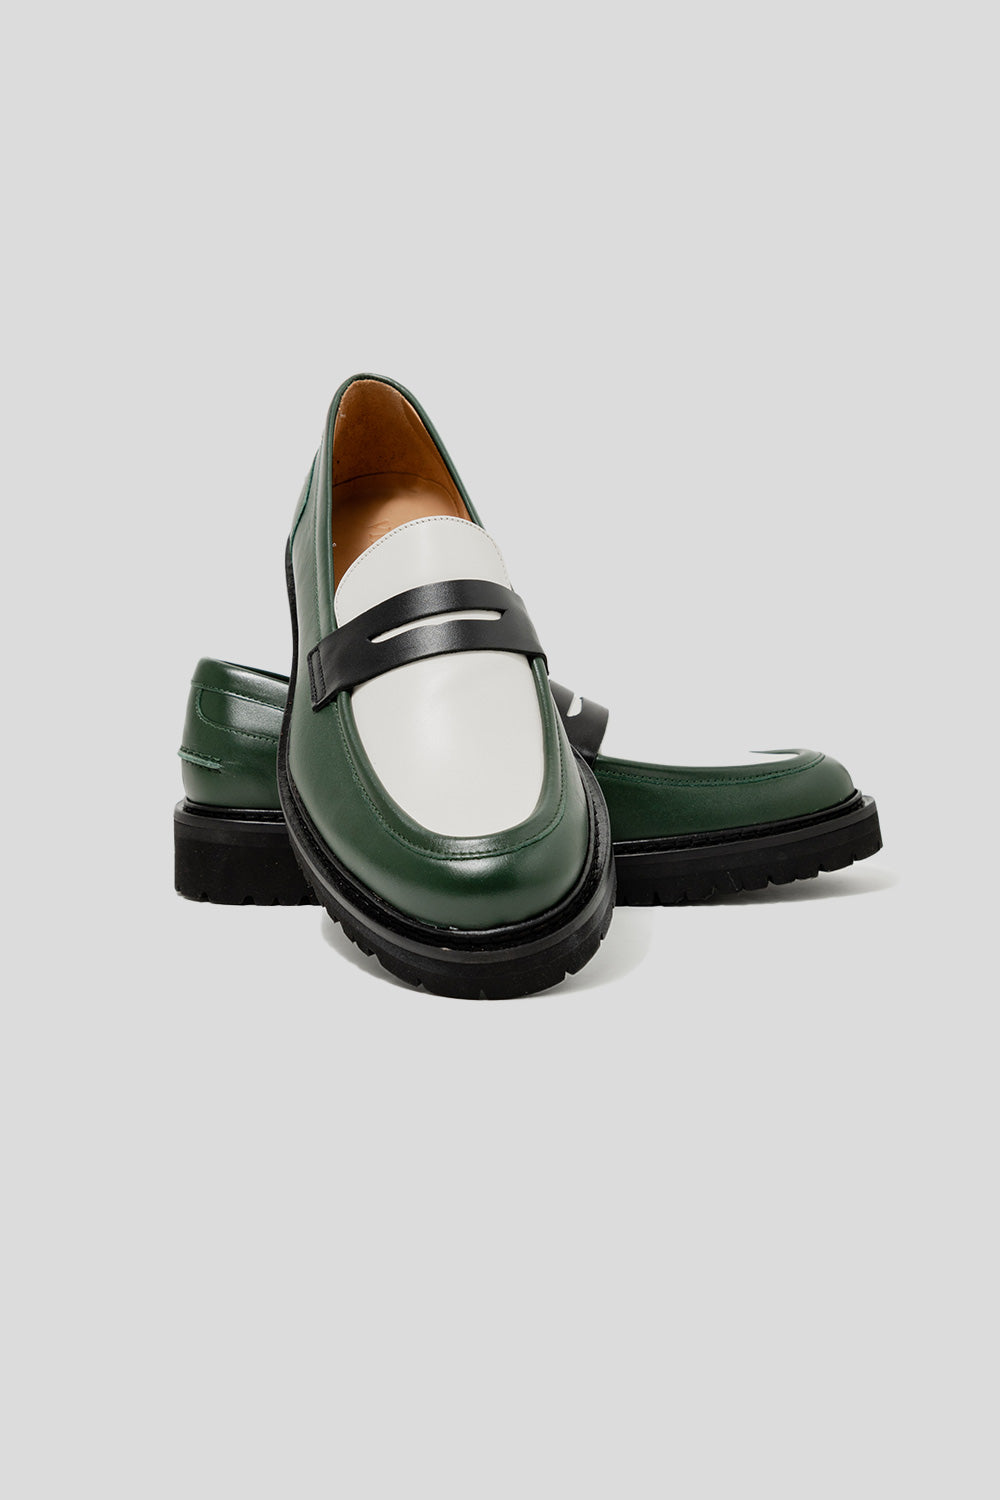 Vinny's Richee Penny Loafer in Green / White / Black